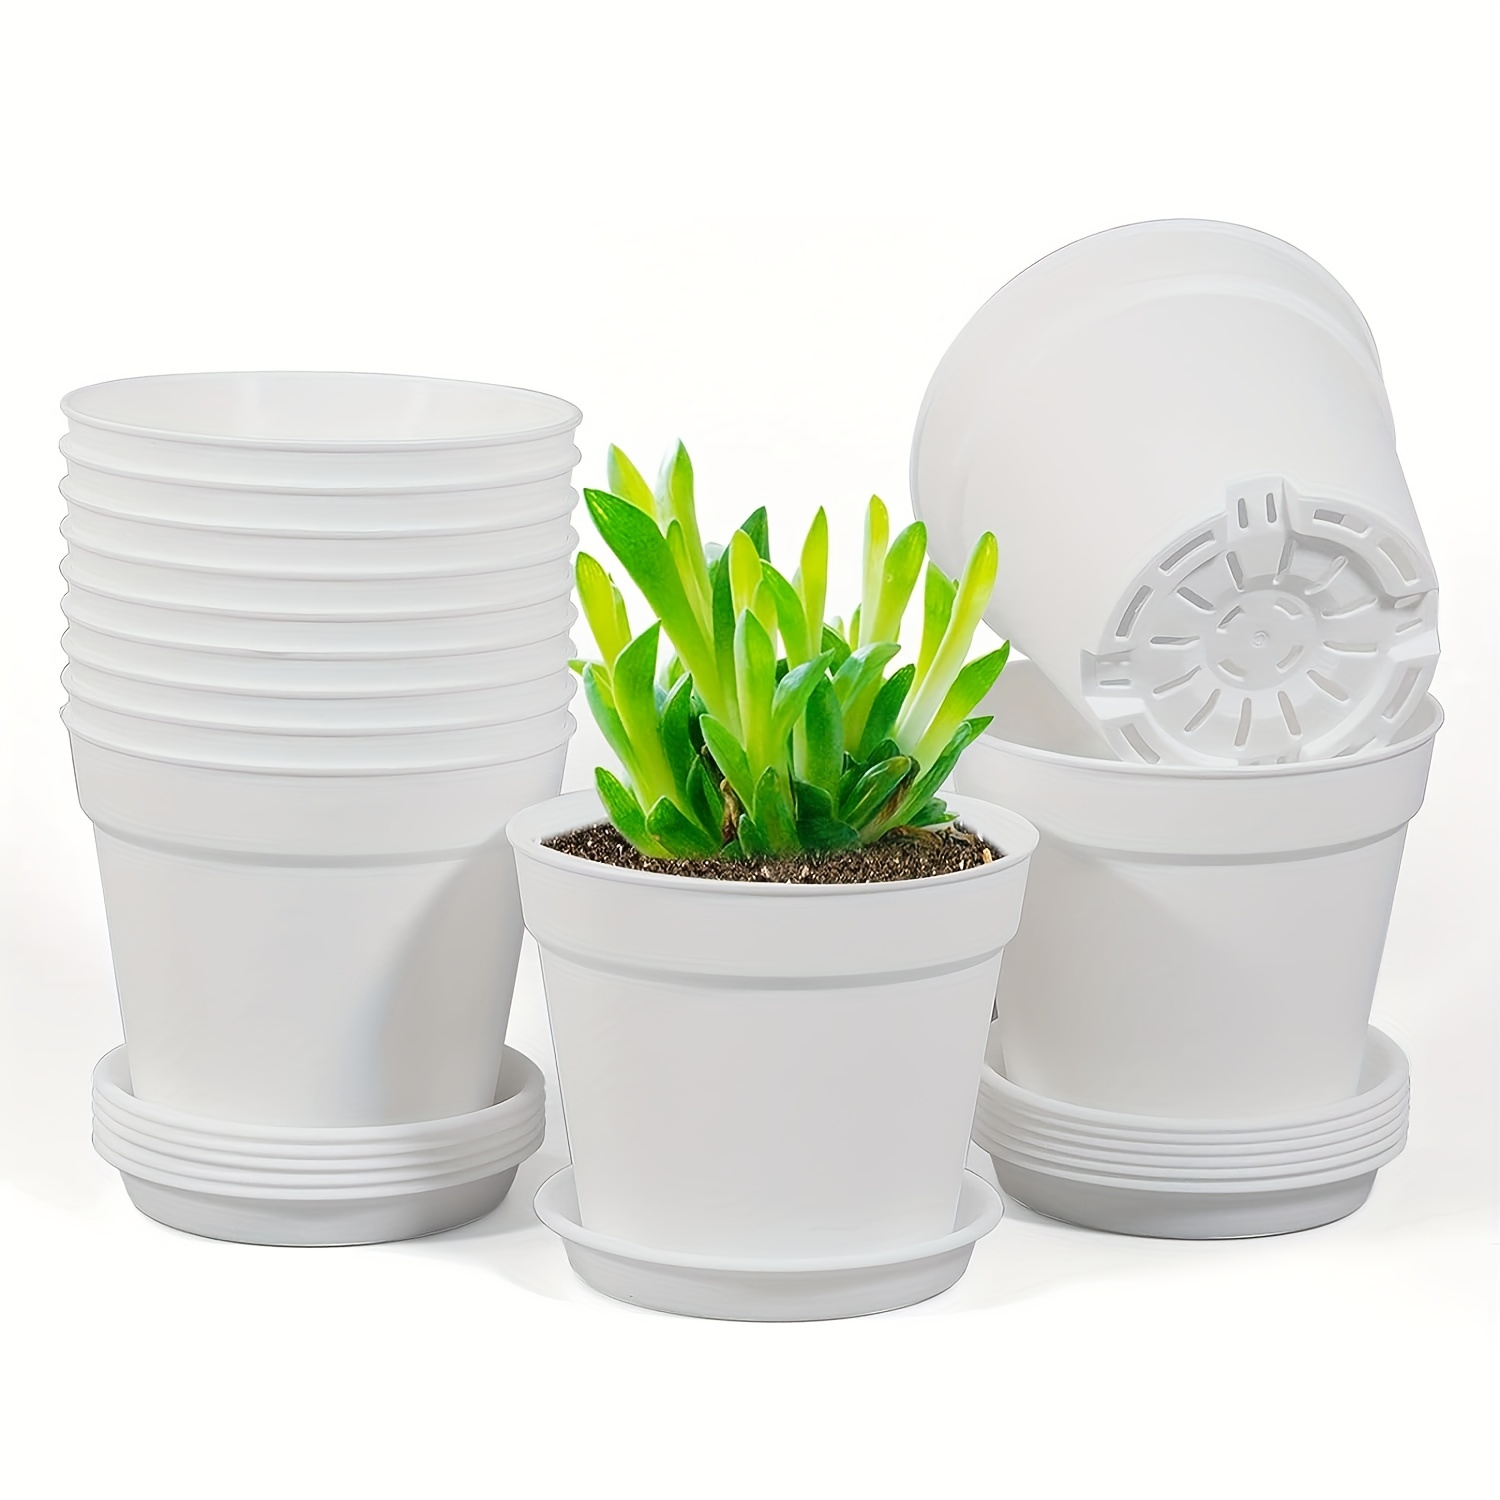 12 Sets Plastic Flower Pots 6 inch White Planters with Drainage